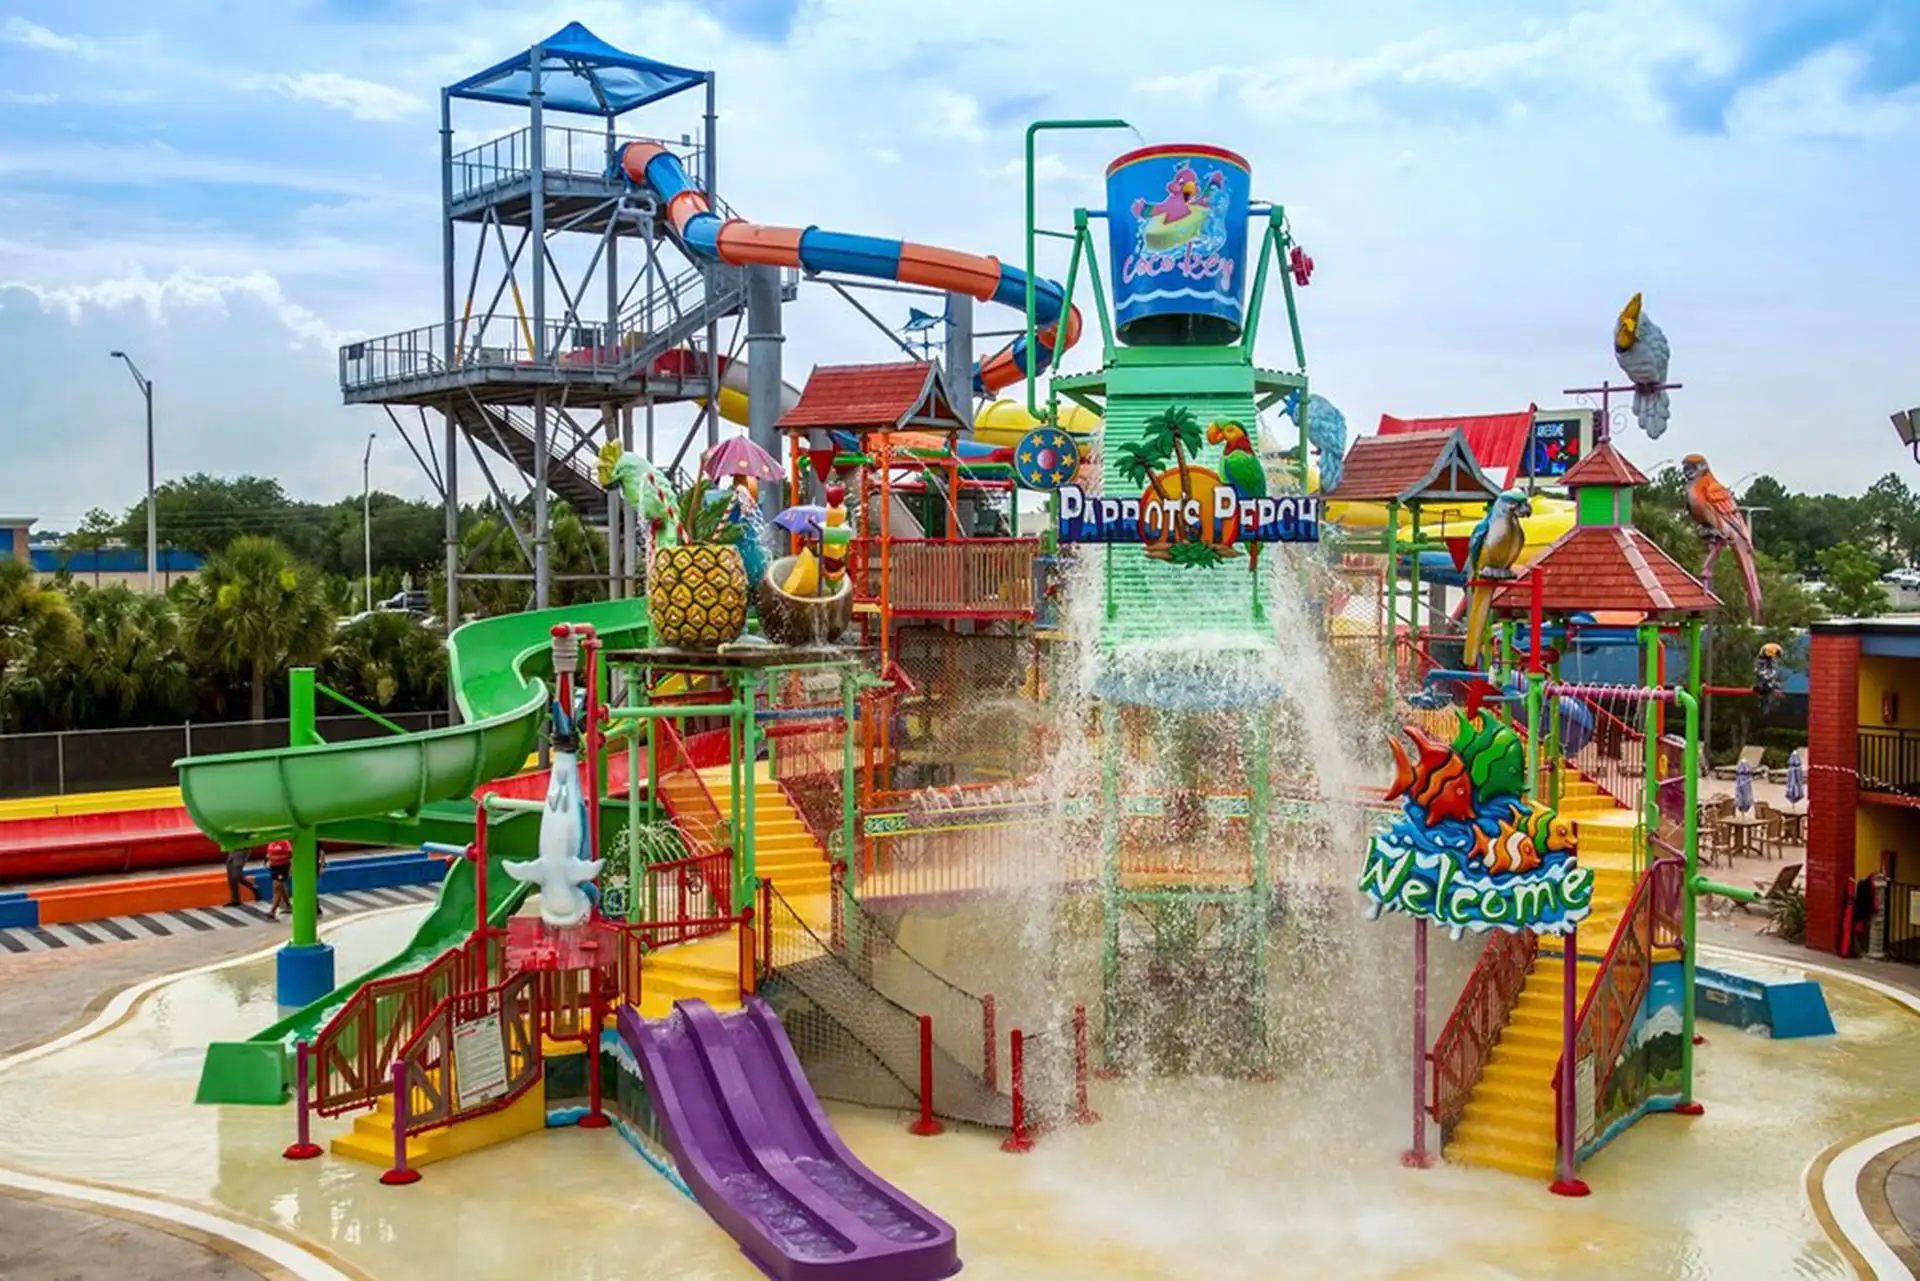 Water Park at CoCo Key Hotel and Water Park Resort in Florida; Courtesy of CoCo Key Hotel and Water Park Resort